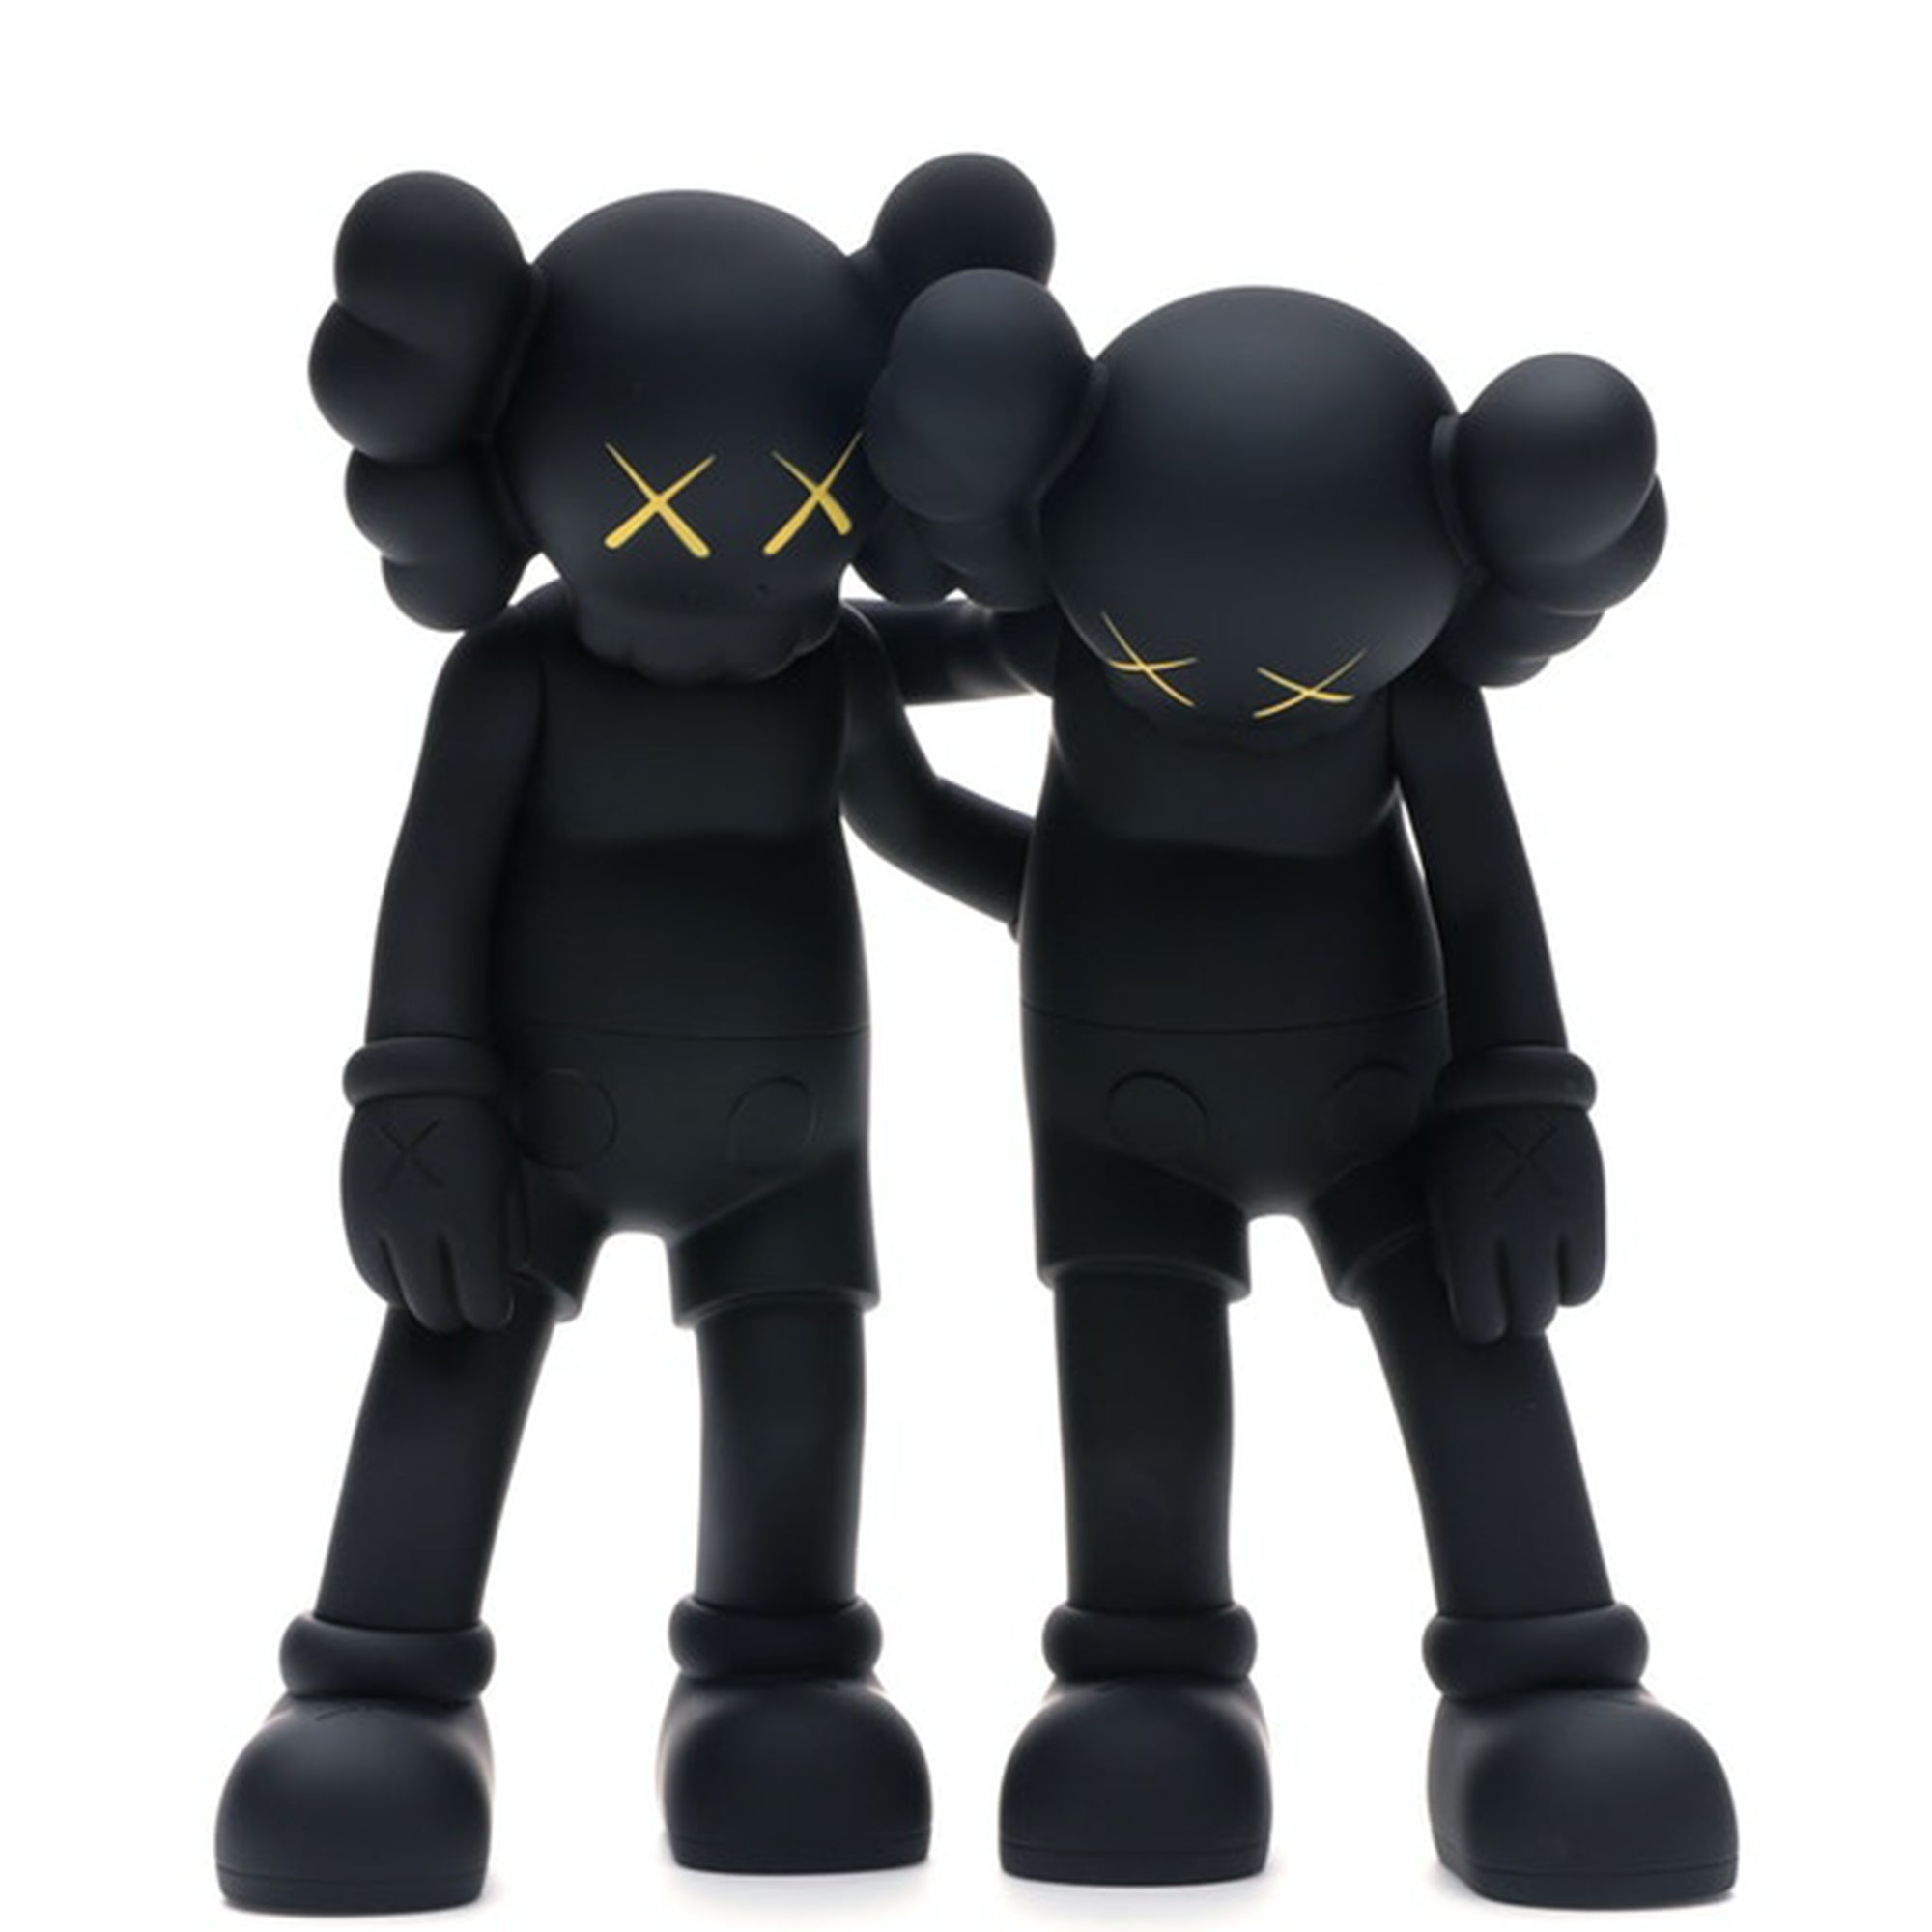 Kaws ALONG THE WAY Open Edition Black by Medicom Toy